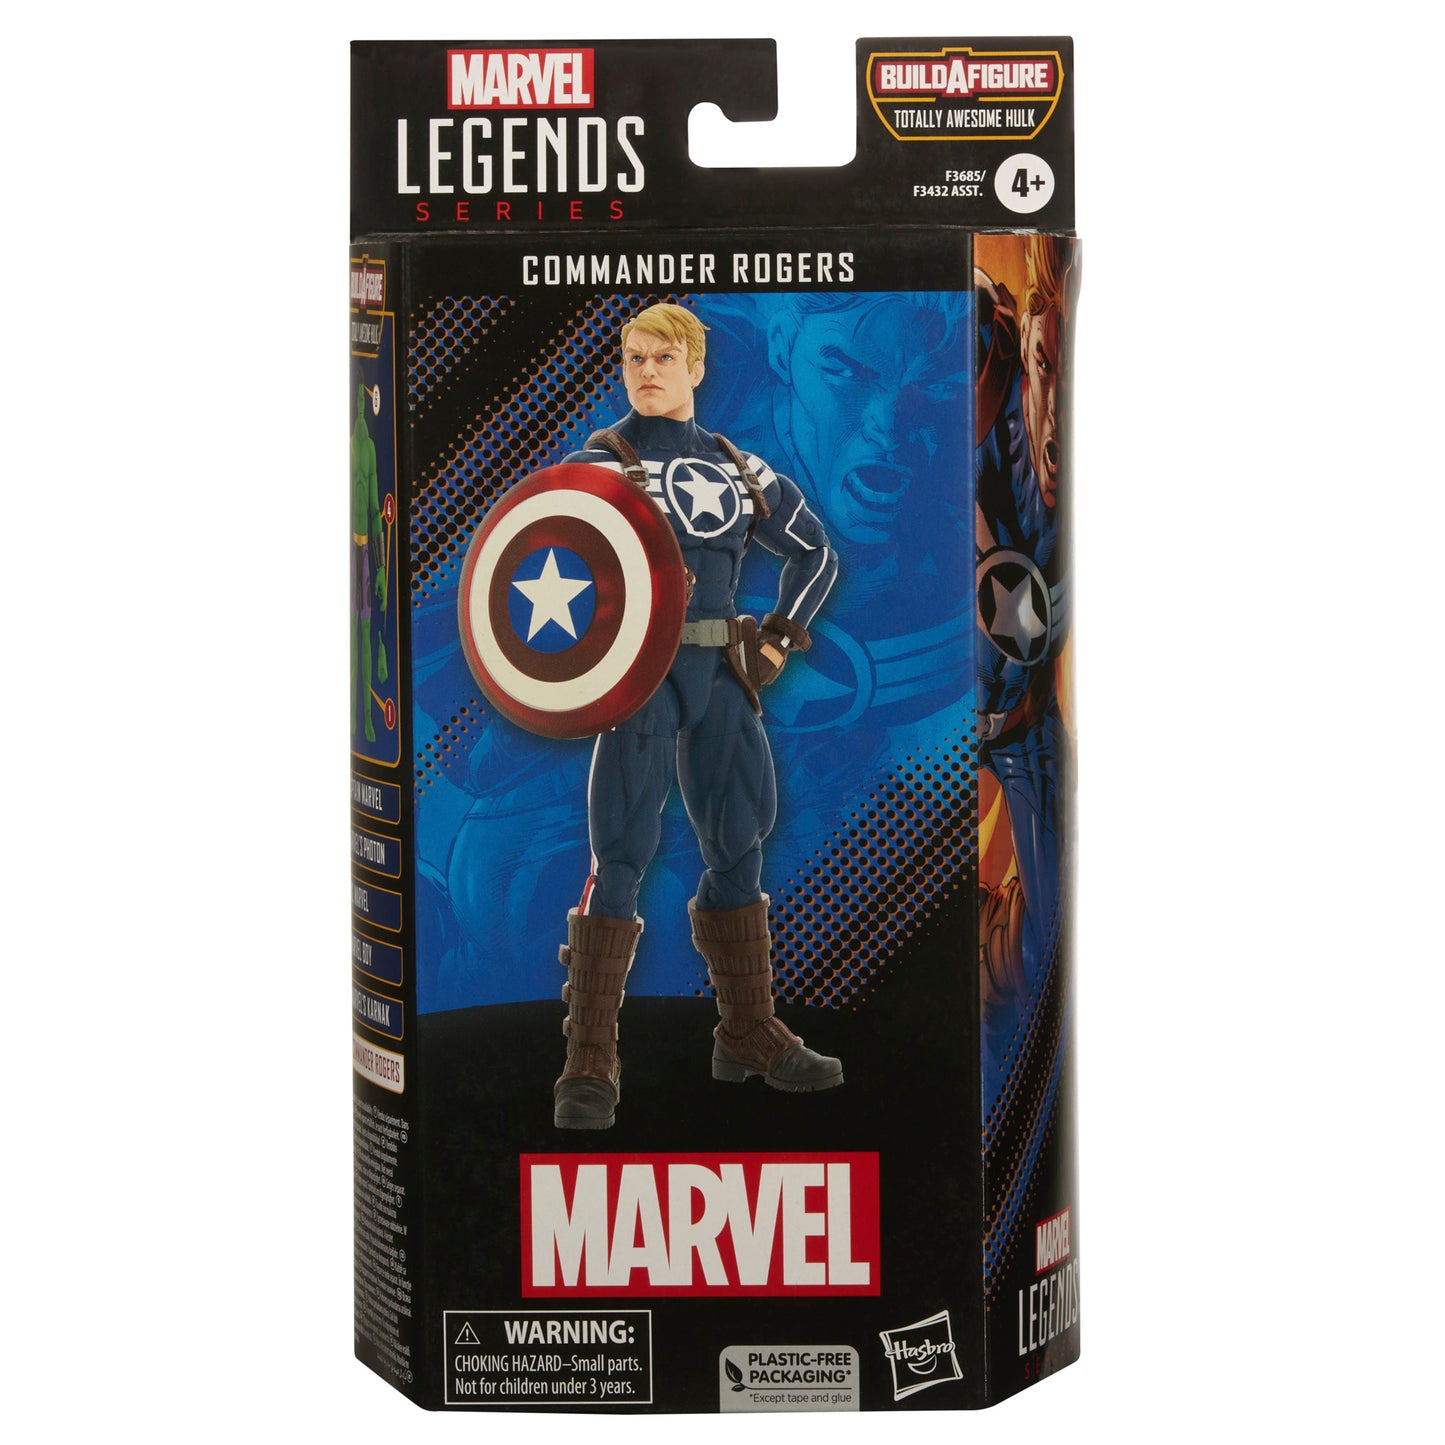 Marvel Comics Commander Rogers Action Figure in a box front view - heretoserveyou